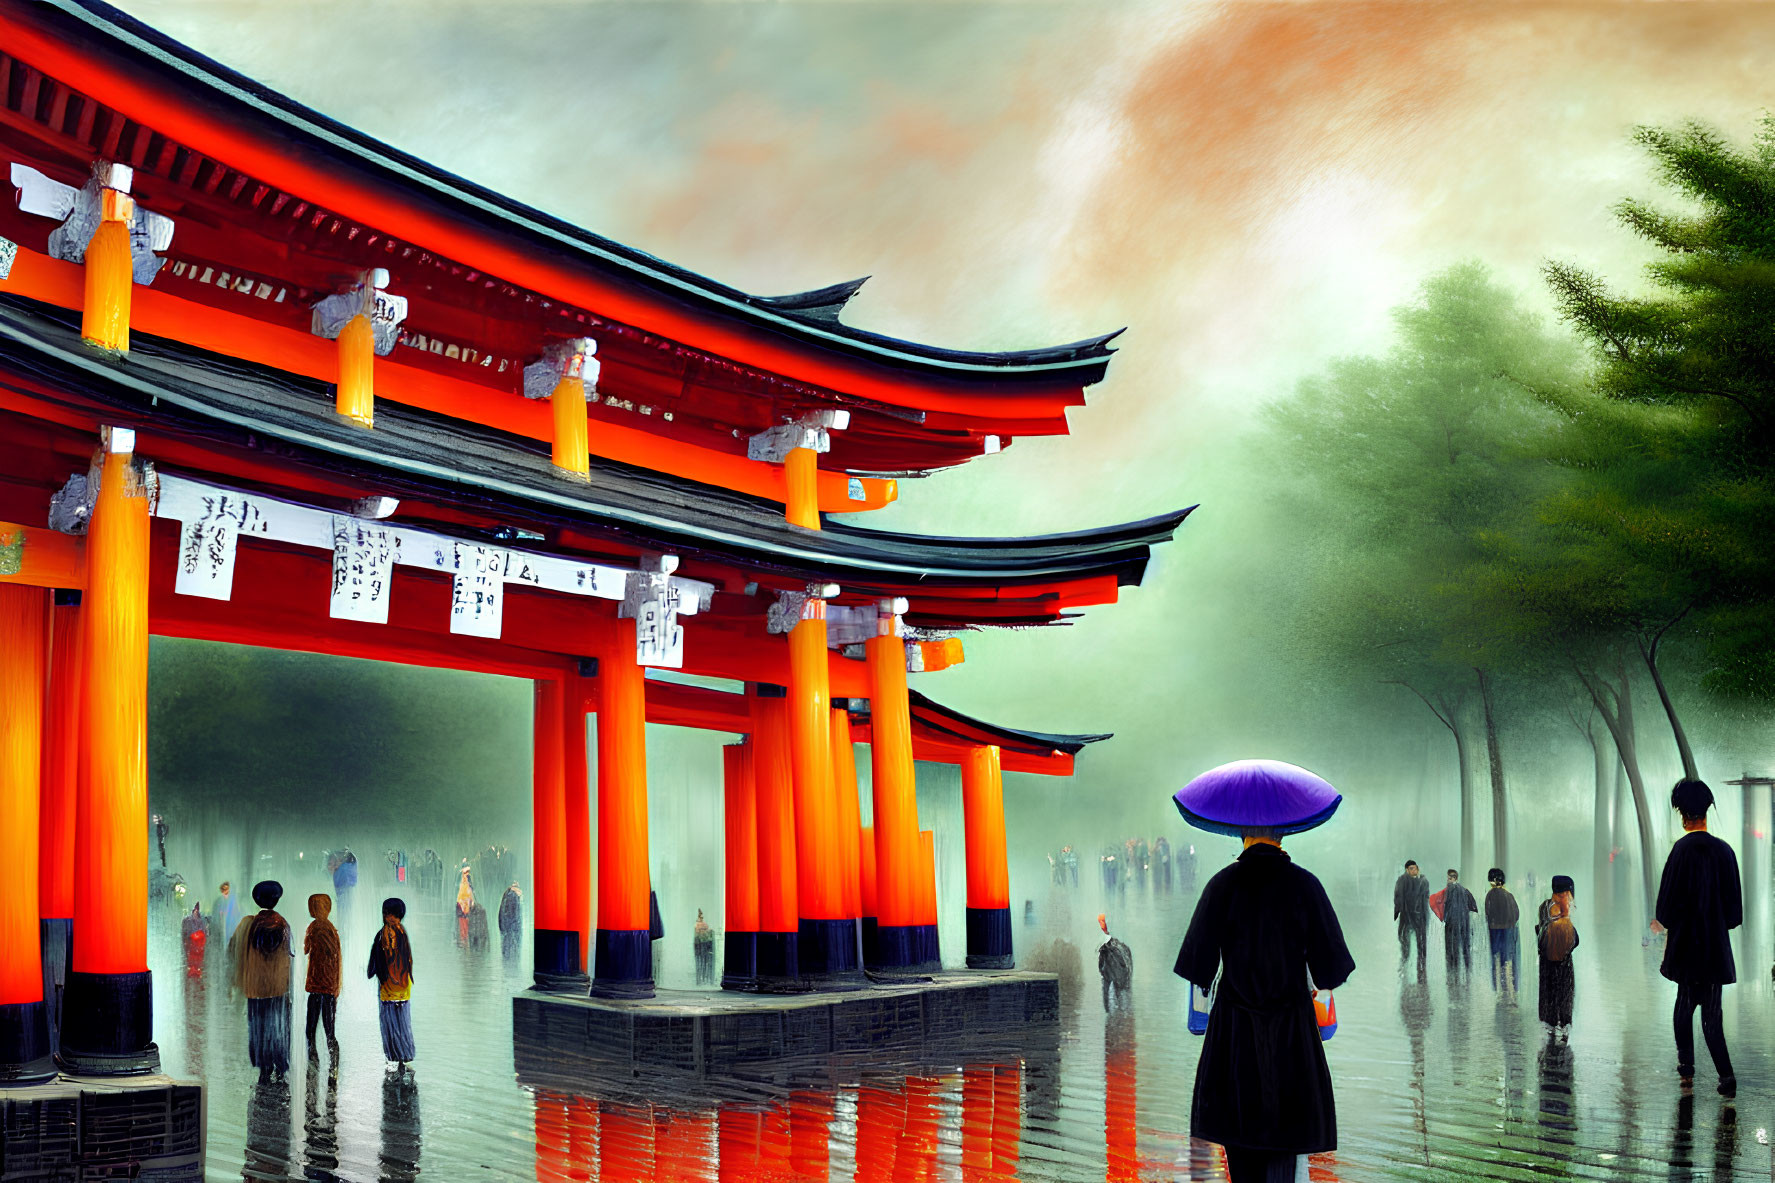 Illustration of People Walking to Japanese Torii Gate in Misty Setting